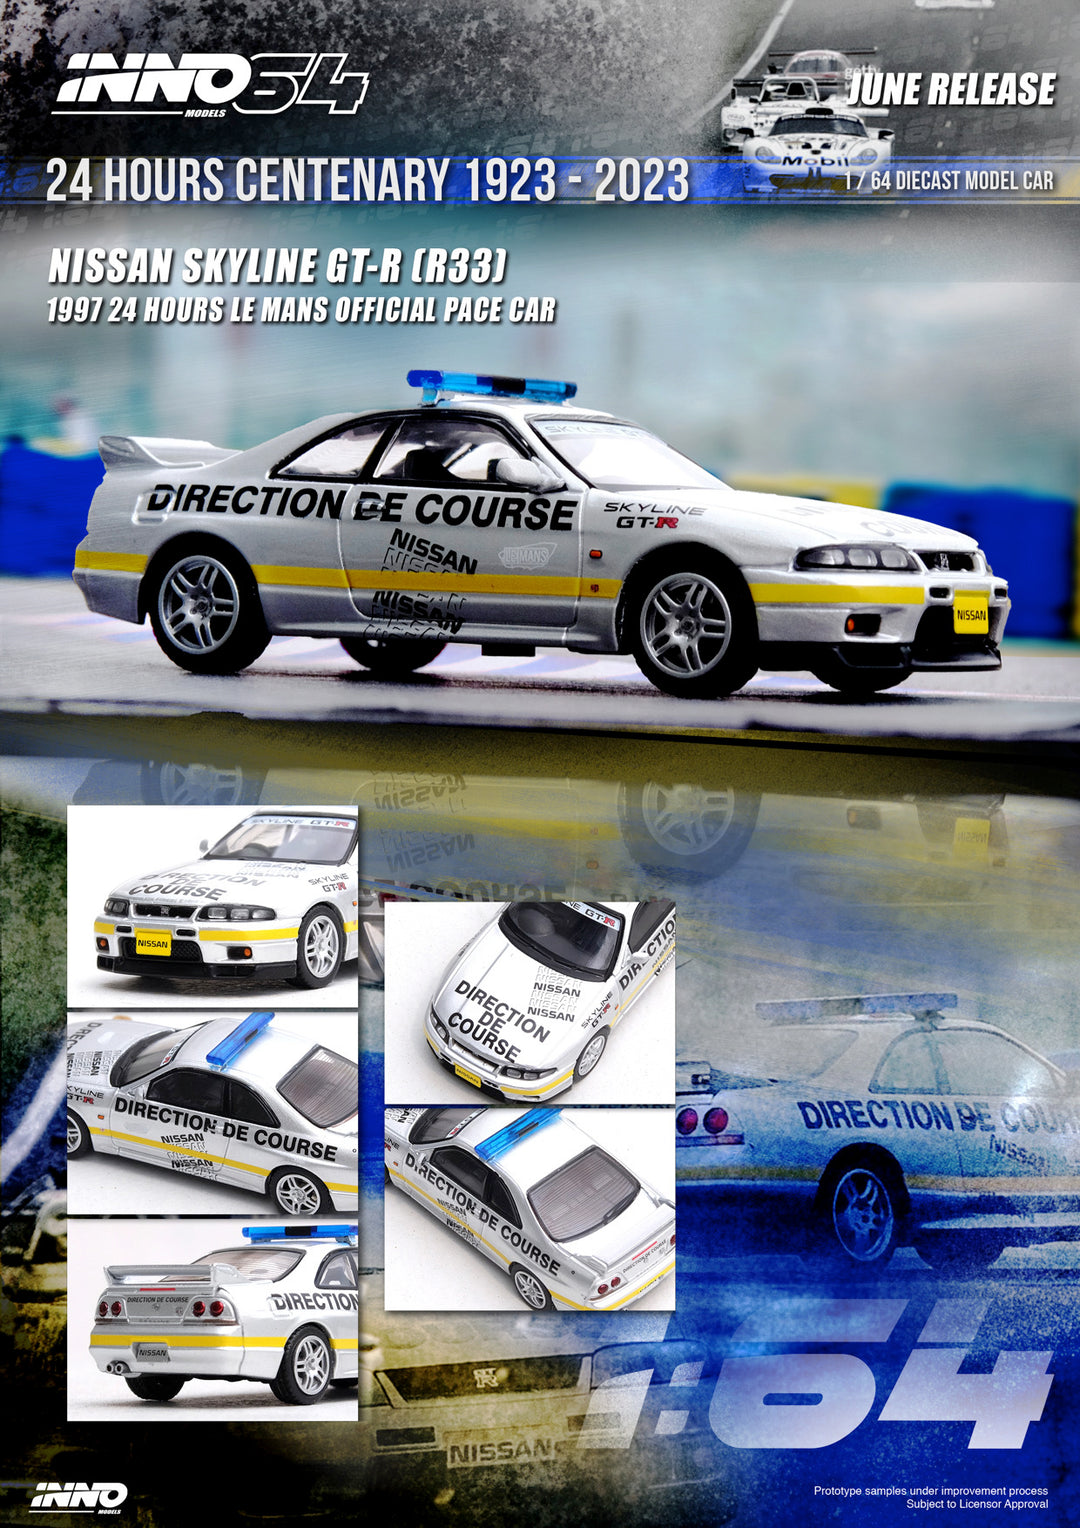 [Preorder] Inno64 1:64 Nissan Skyline GTR (R33) 24 Hours Le Mans Offical Pace Car 1997